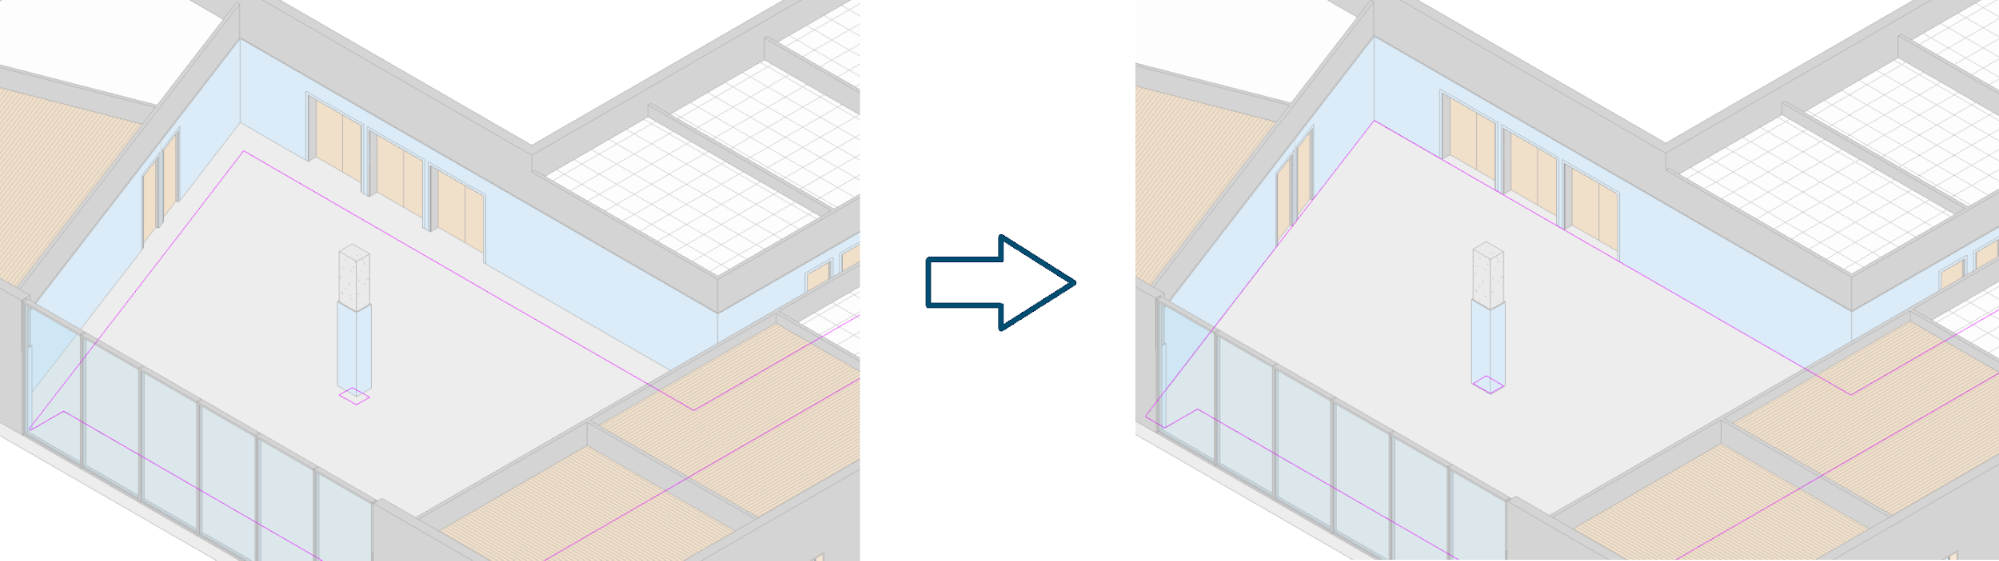 Autodesk Revit Overview by CadeMate